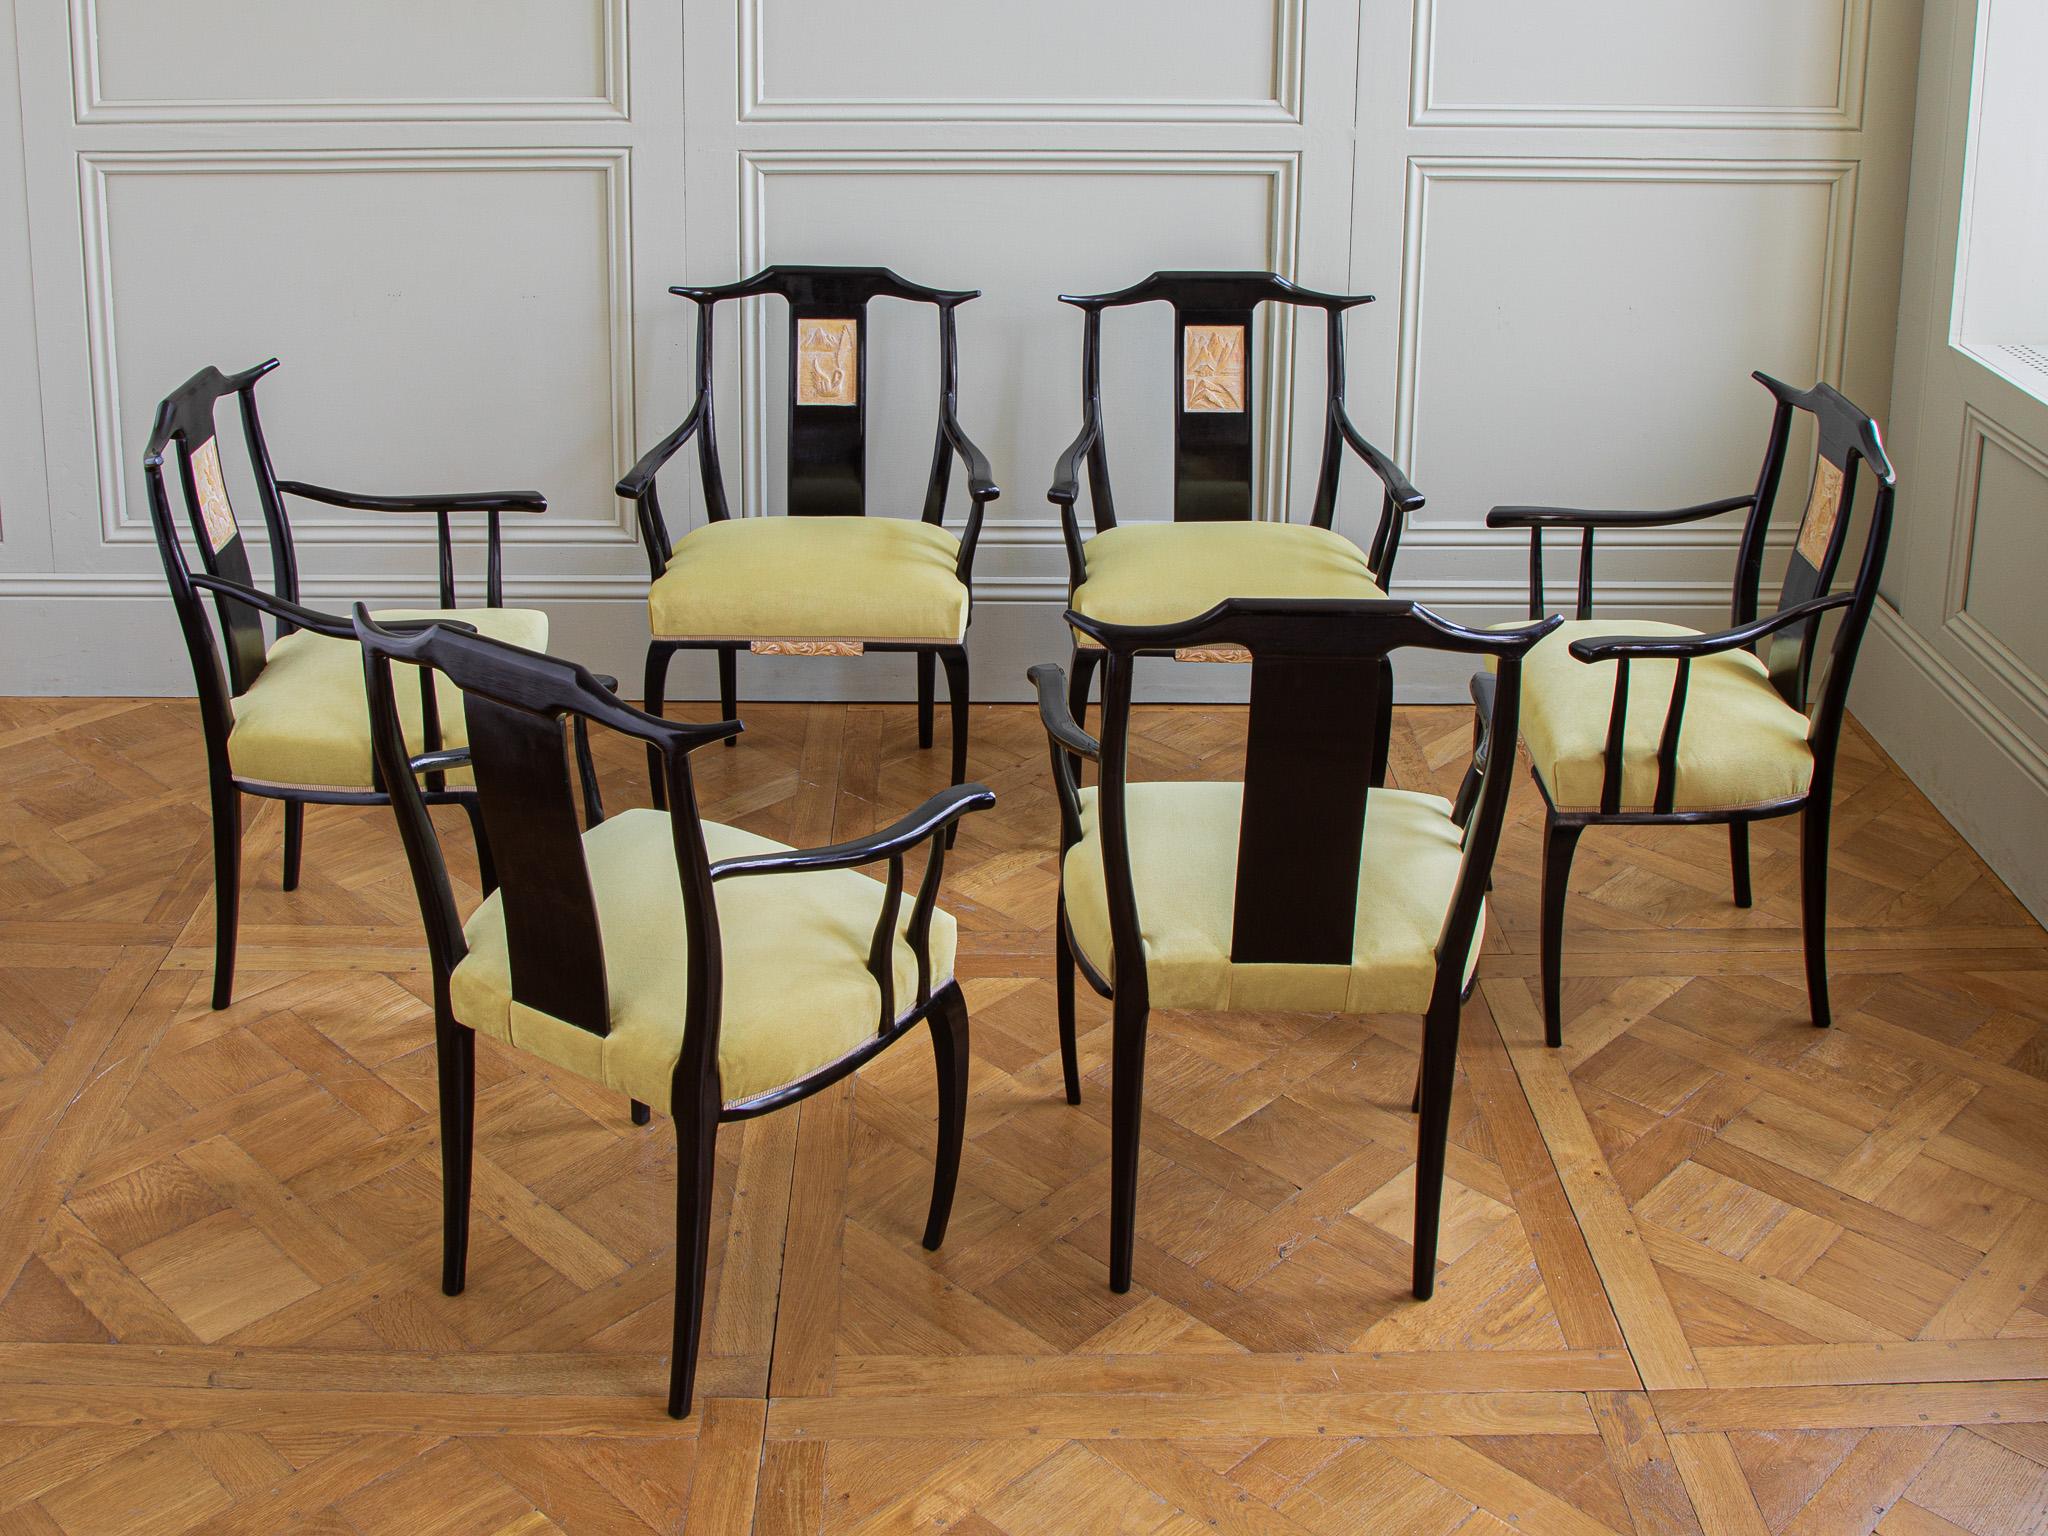 A unique set of six dining chairs, hand made, in France during the 1930's. The one off, designer chairs were commissioned to be oriental in style. The design has beautiful clean lines and subtle curves which are further enhanced by their original,